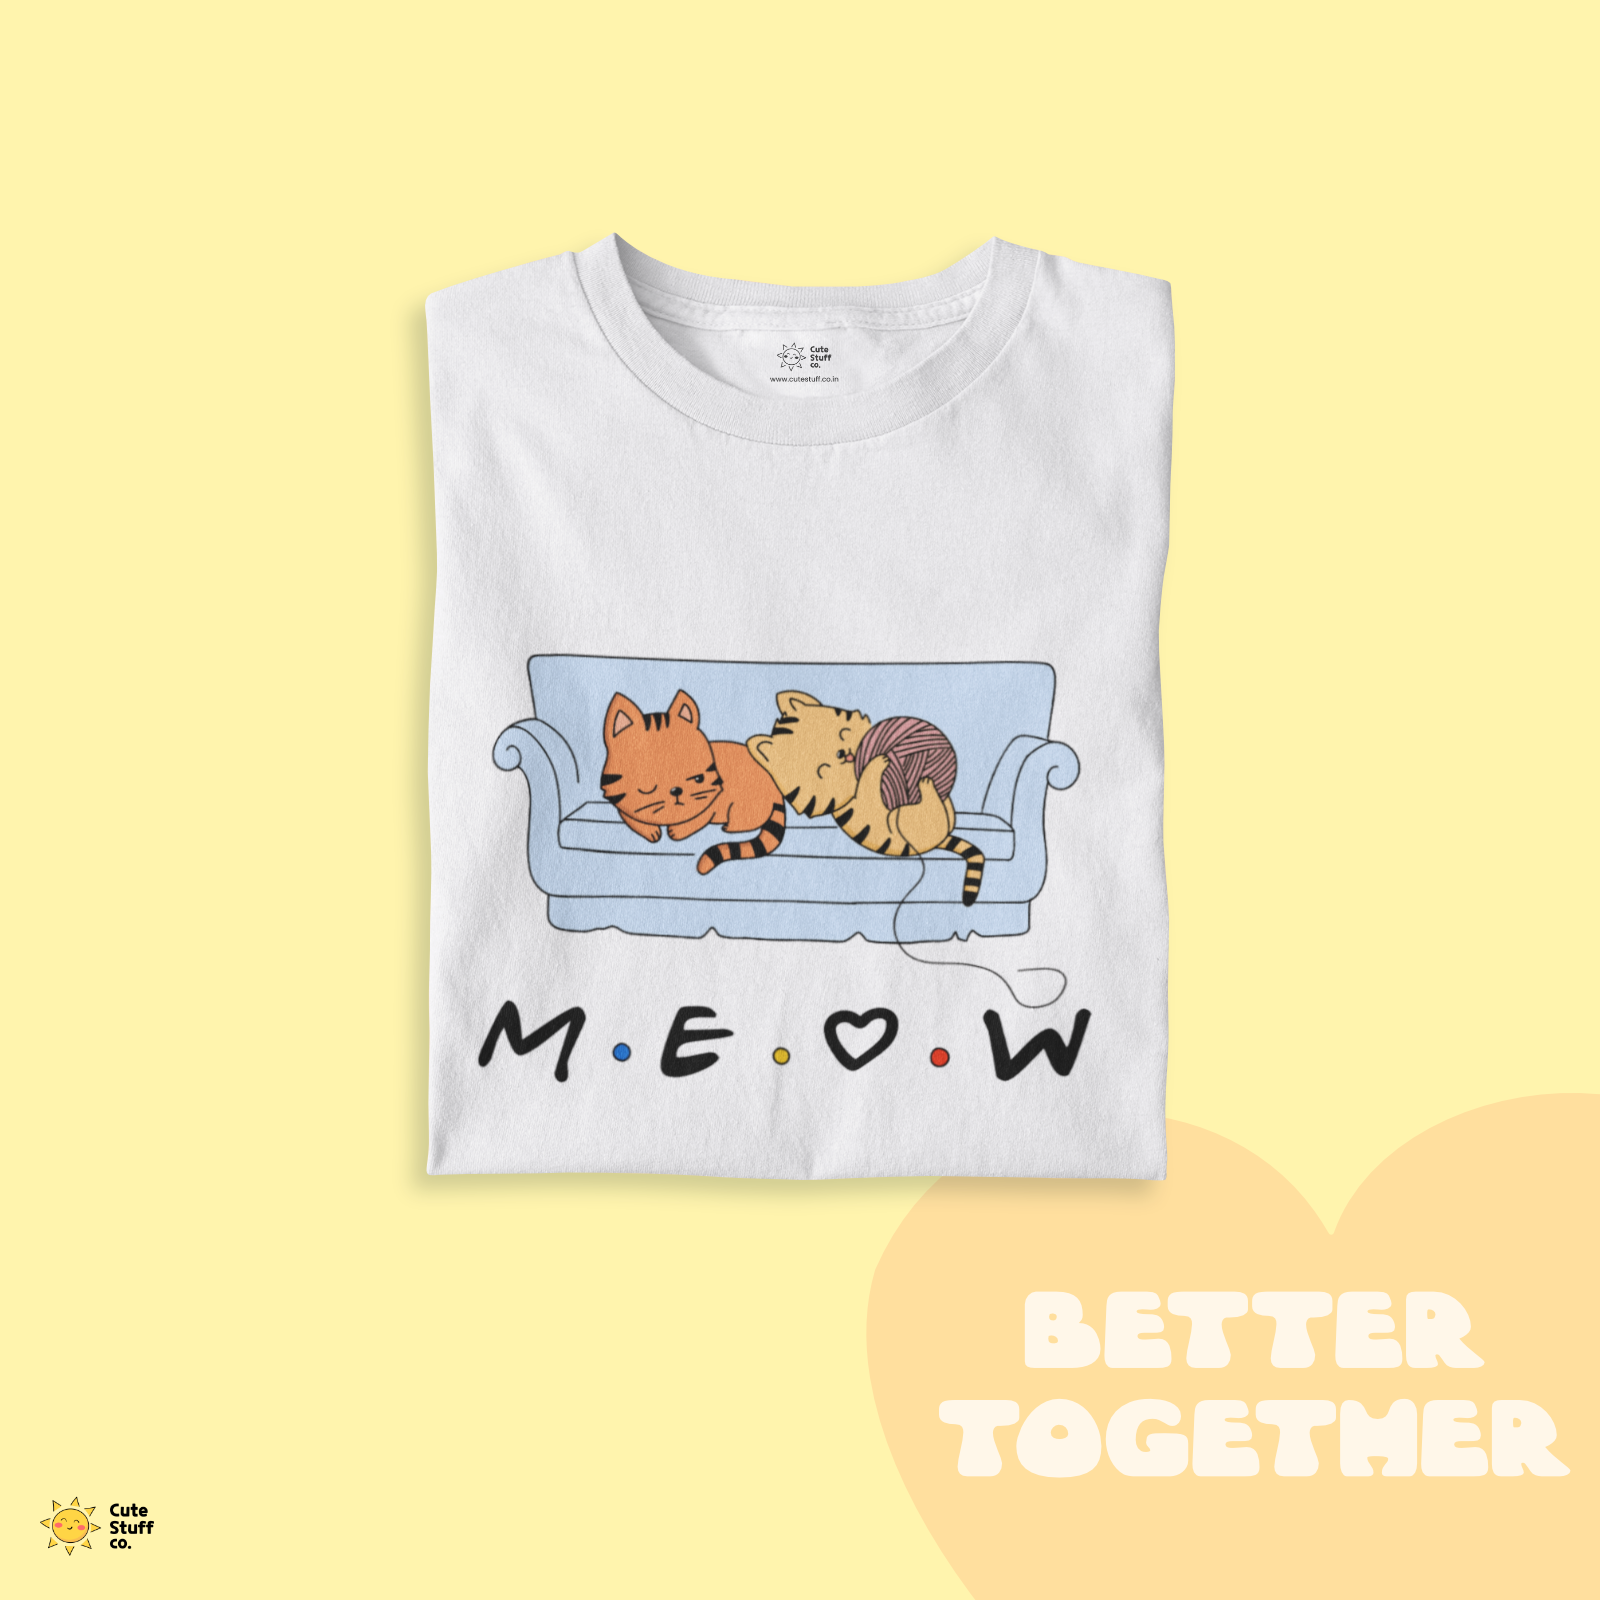 Meow Me Oversized Unisex T-shirts - Better Together